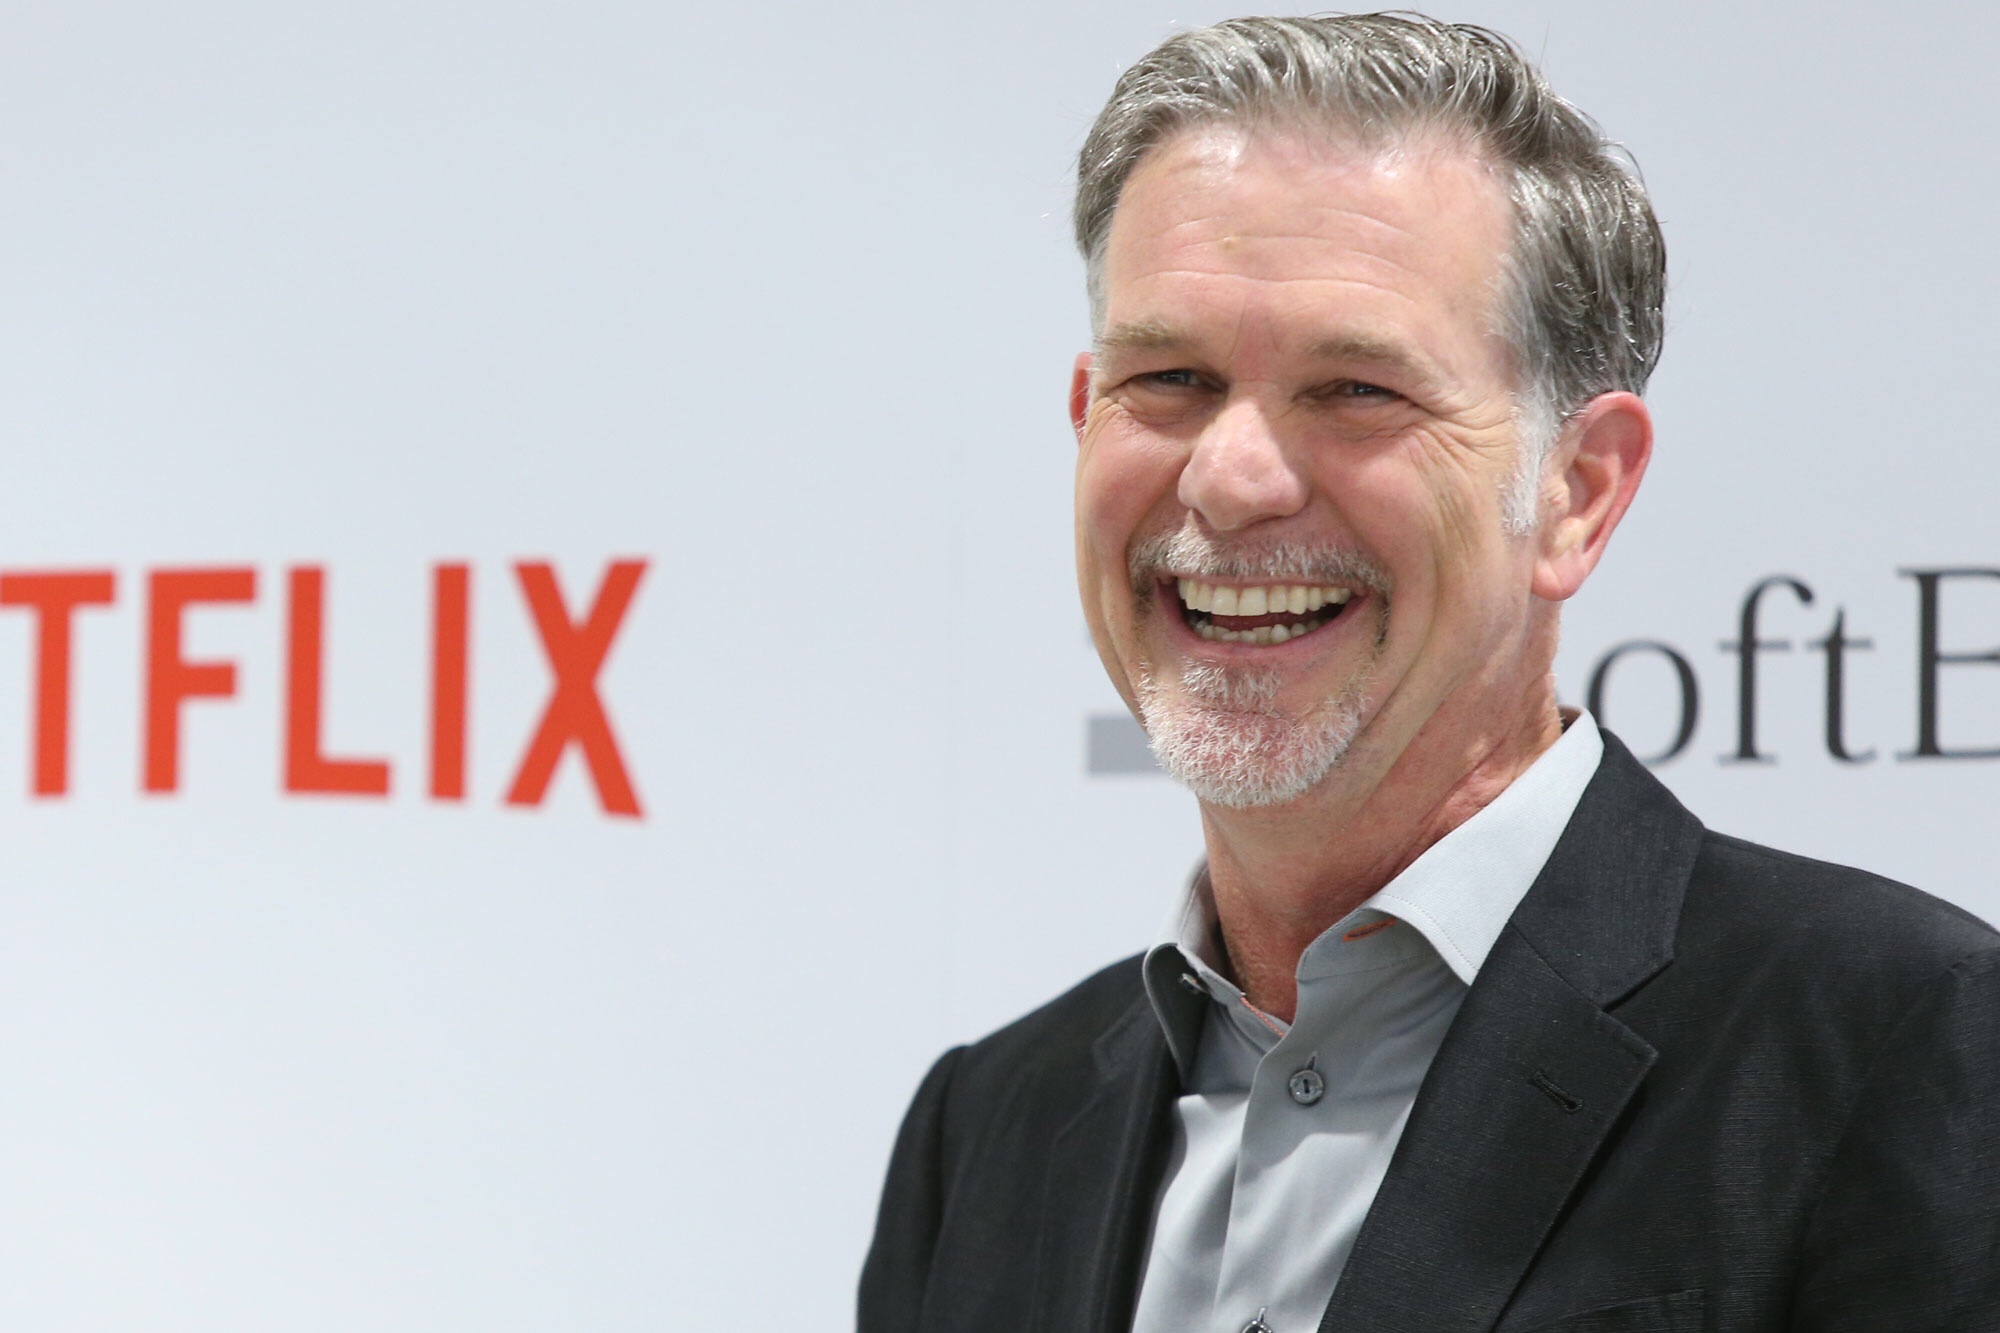 In fourth quarter earnings results, Netflix added 8.3 million customers